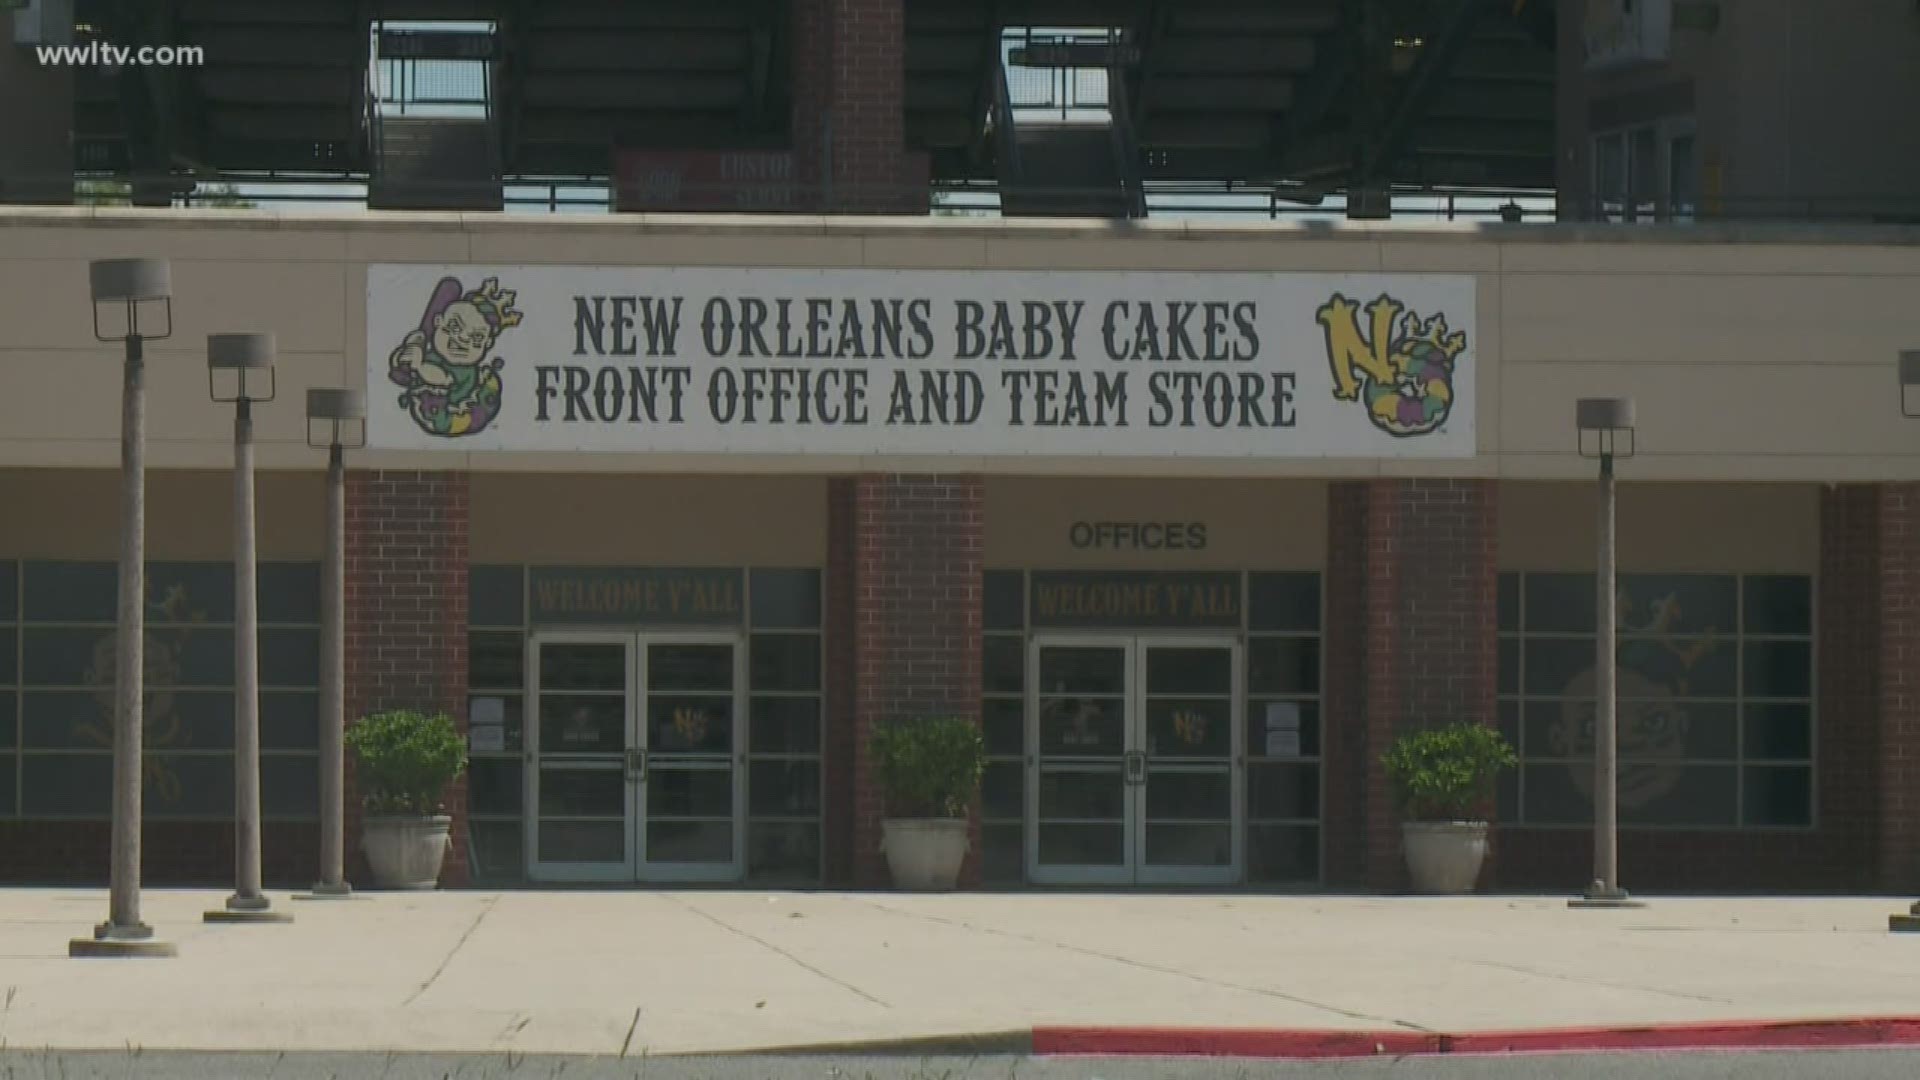 The state agency that owns the stadium says the Baby Cakes have never given formal notification that the team is leaving.